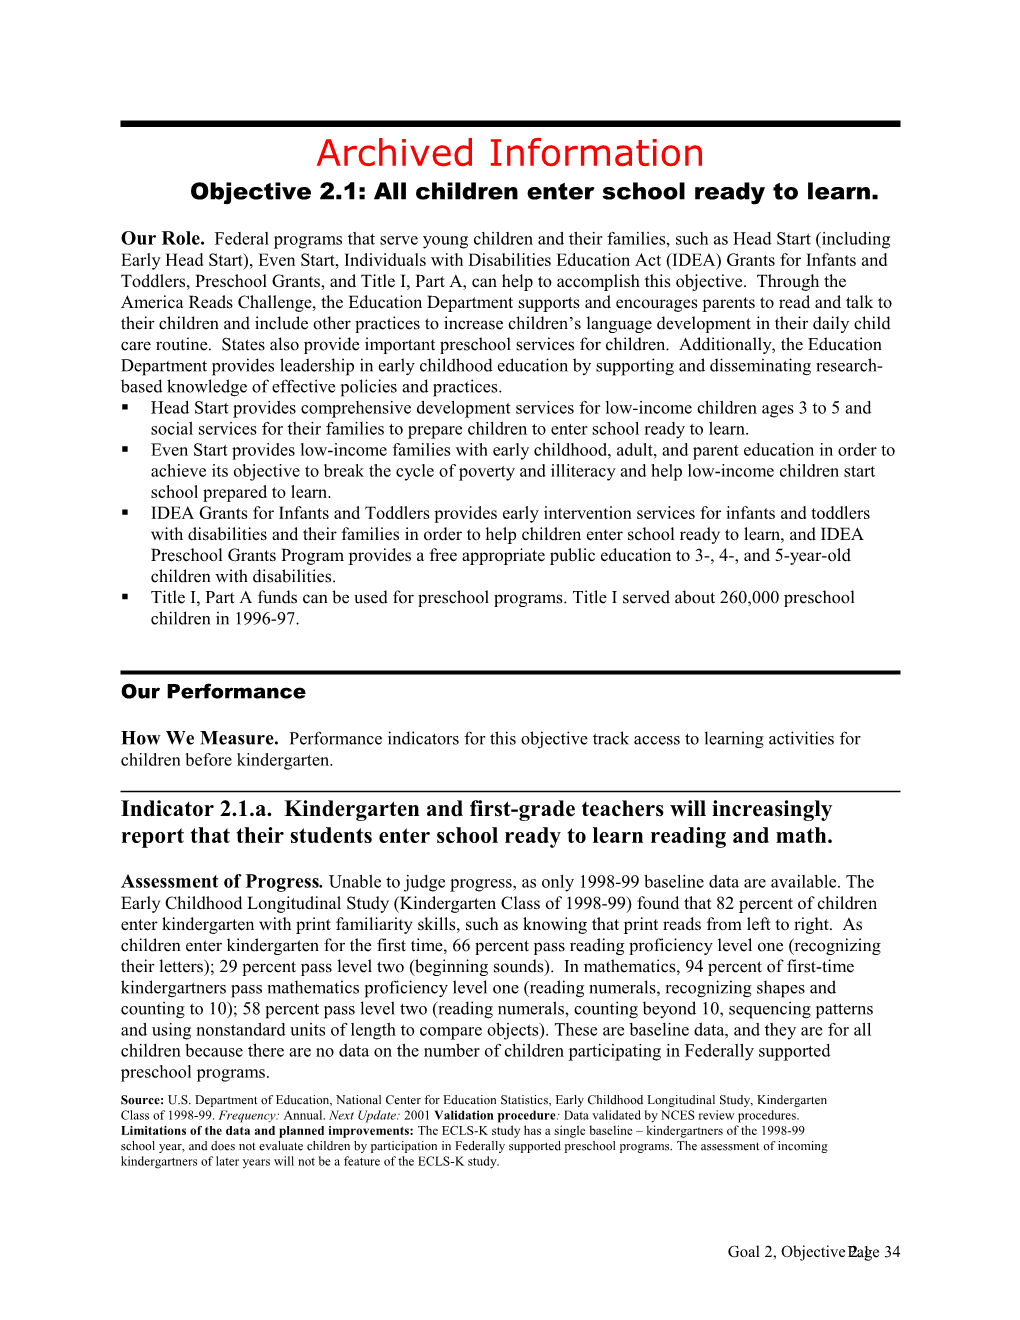 Archived: Objective 2.1: All Children Enter School Ready to Learn